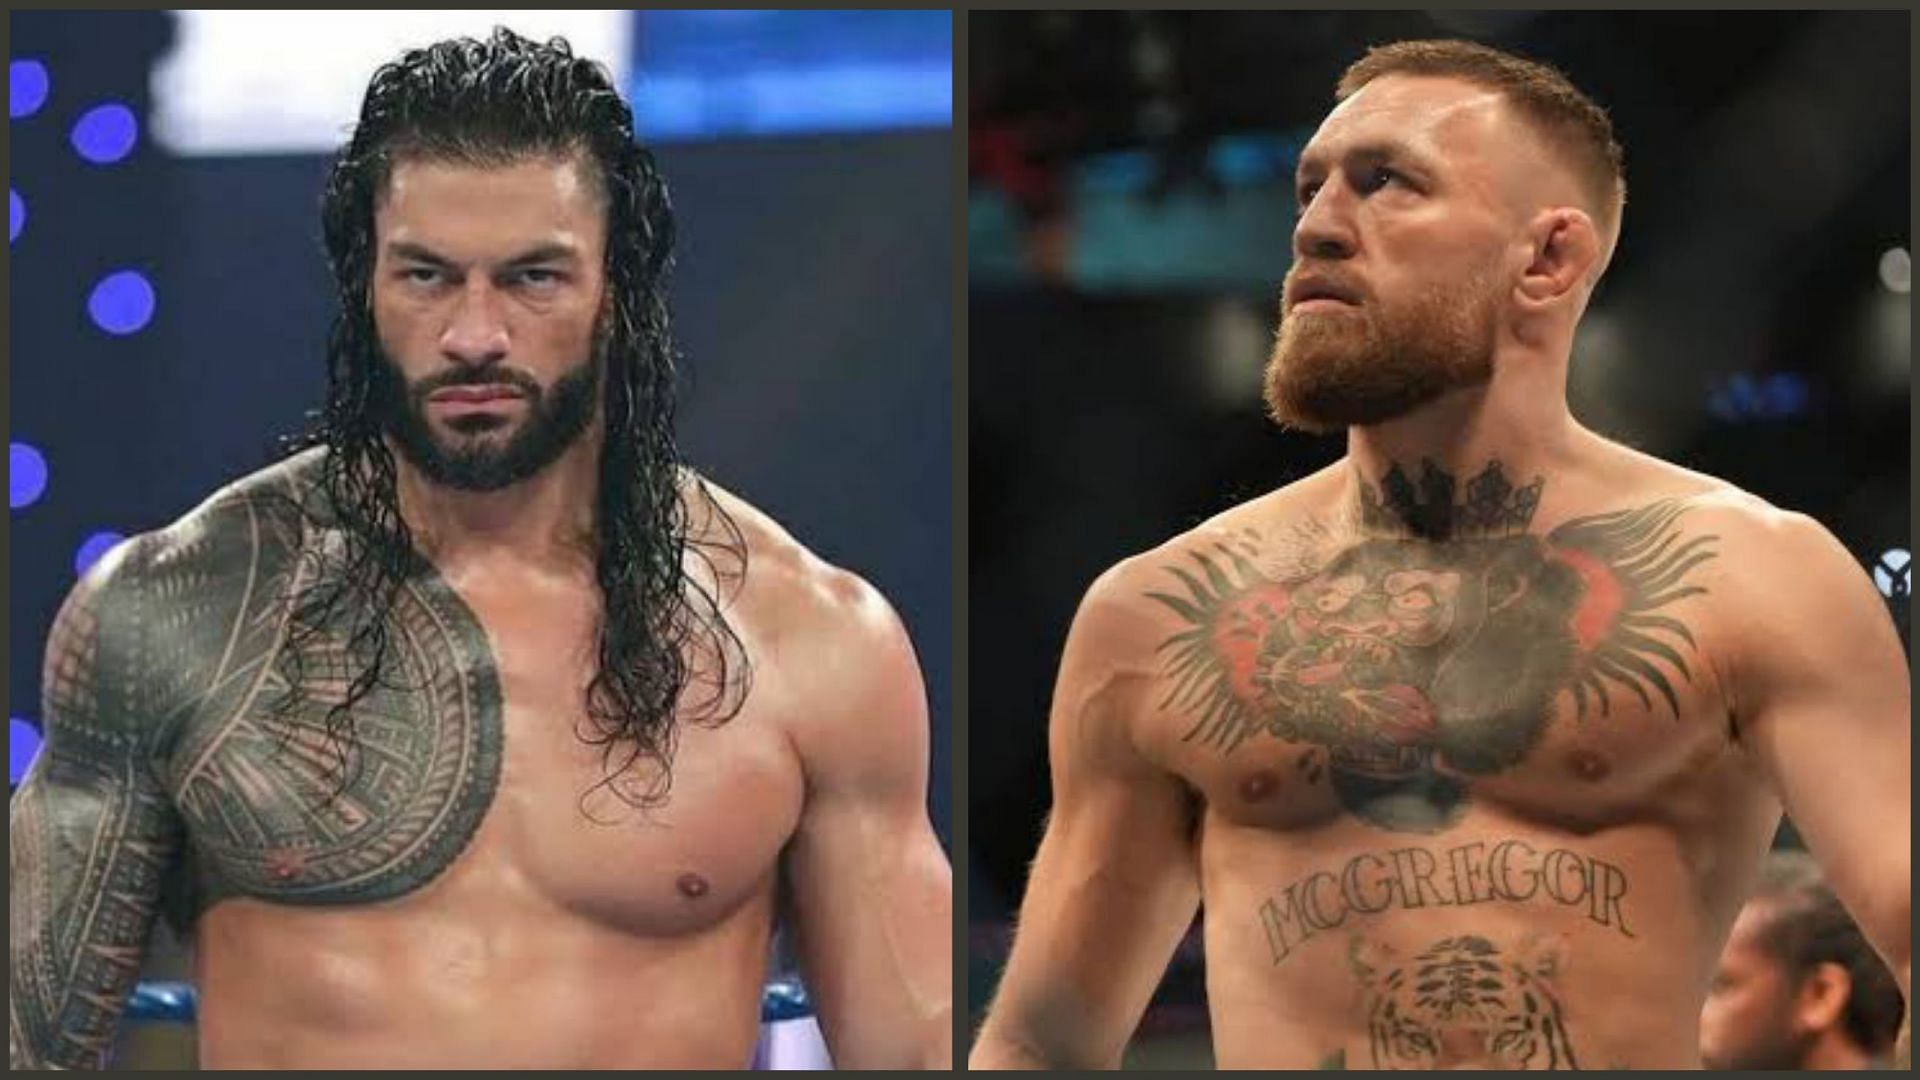 Roman Reigns and a few other superstars have mocked McGregor in public.